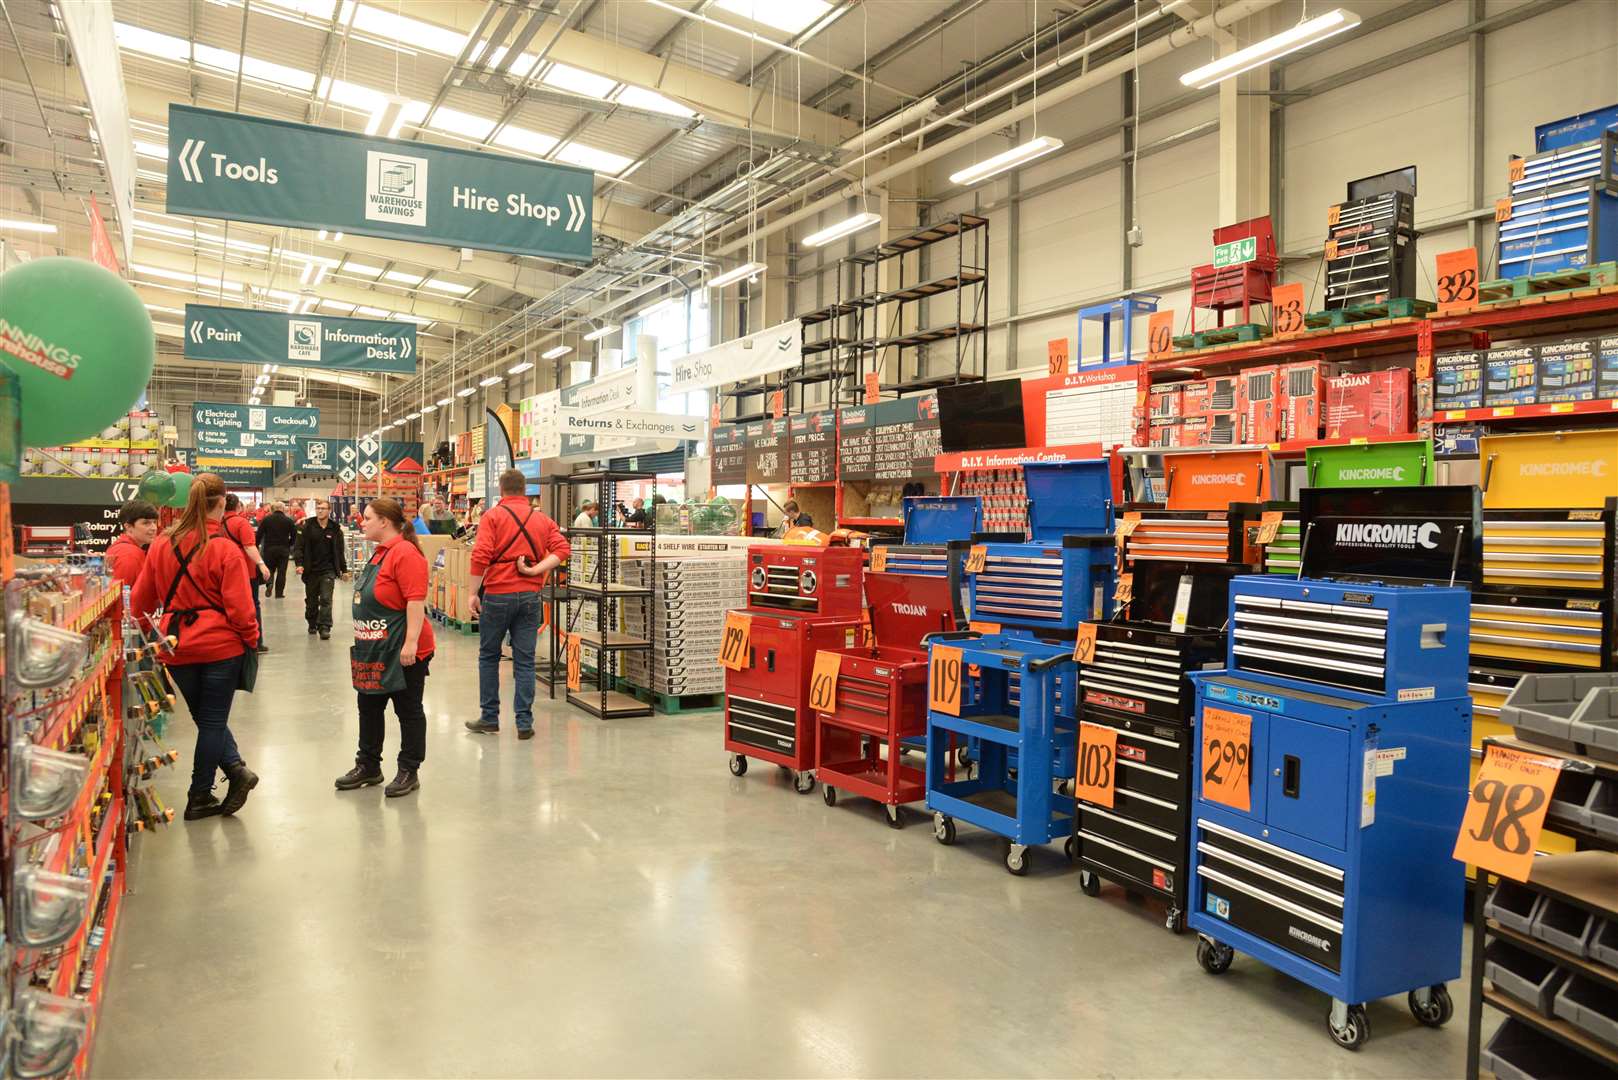 Many Homebase stores had been rebranded to Bunnings after it was sold two years ago